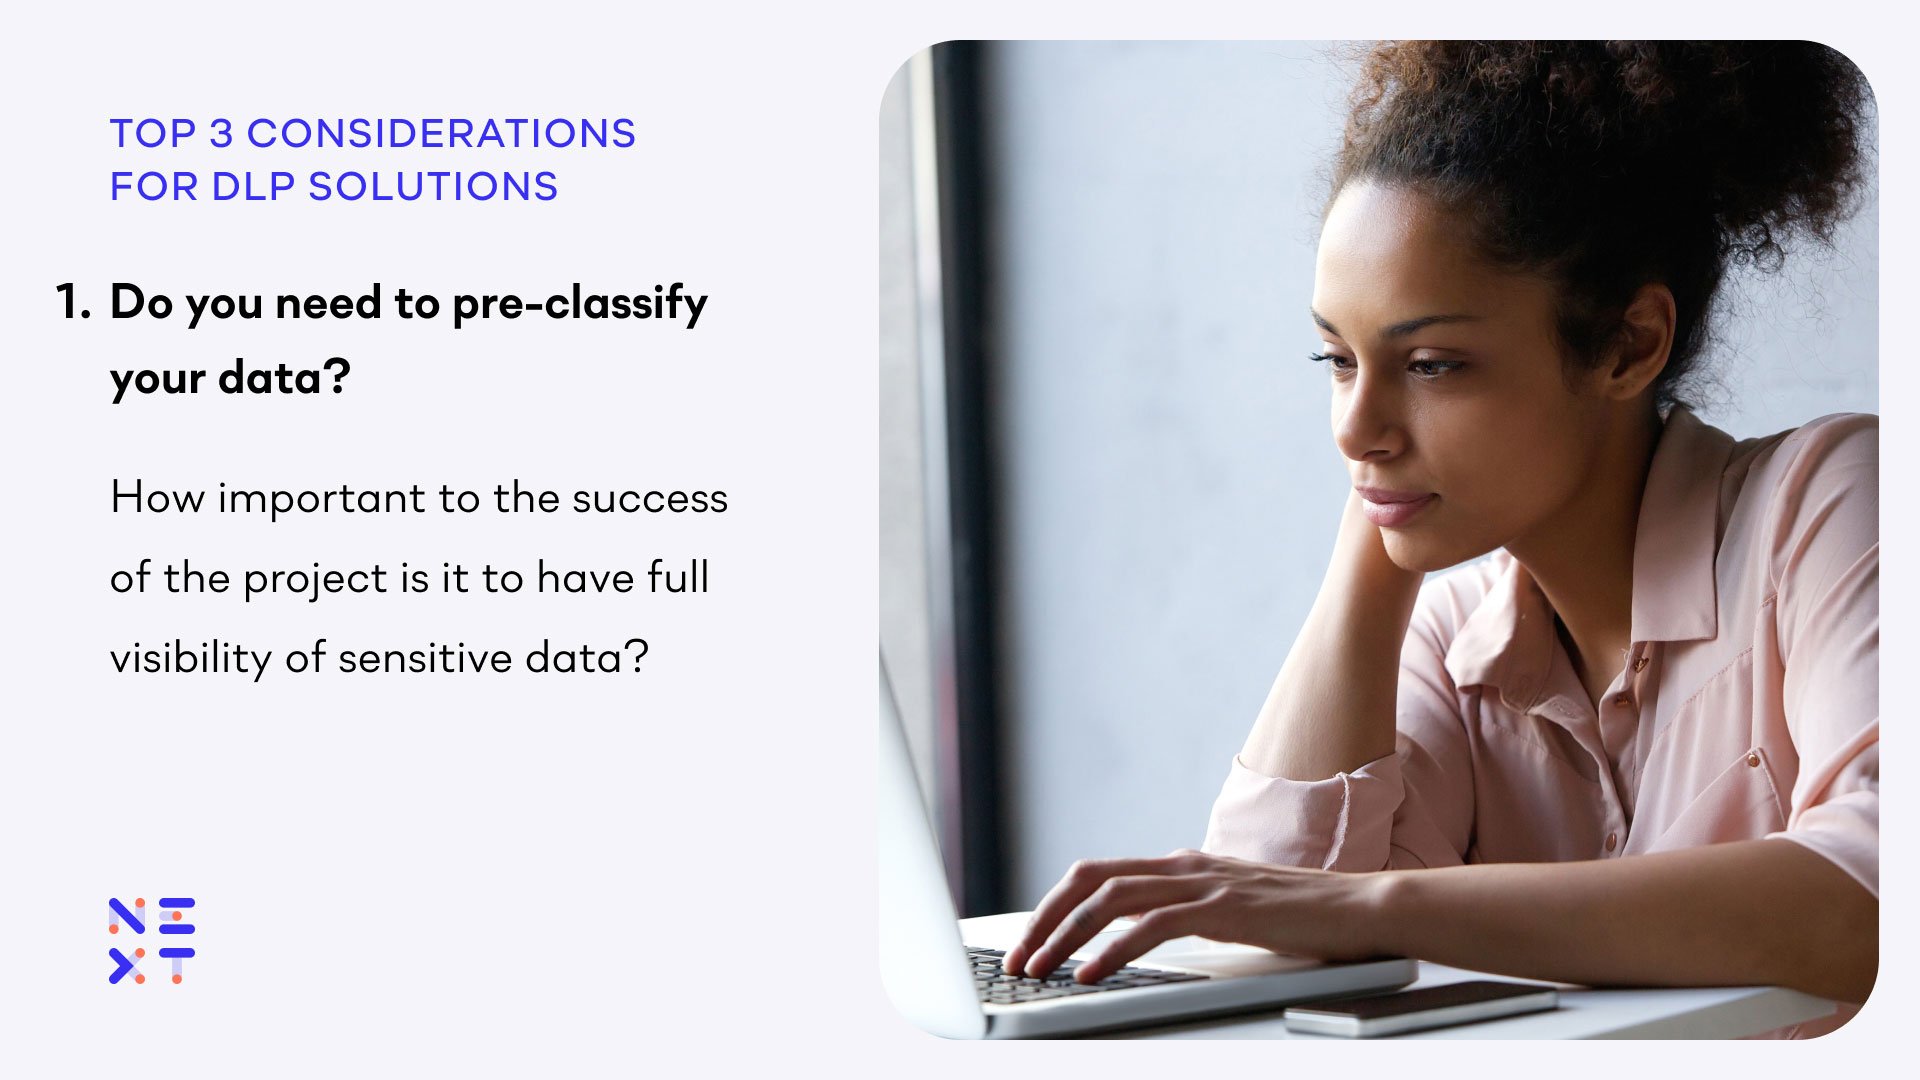 Top considerations for DLP solutions - 1: Will you need to pre-classify your data?